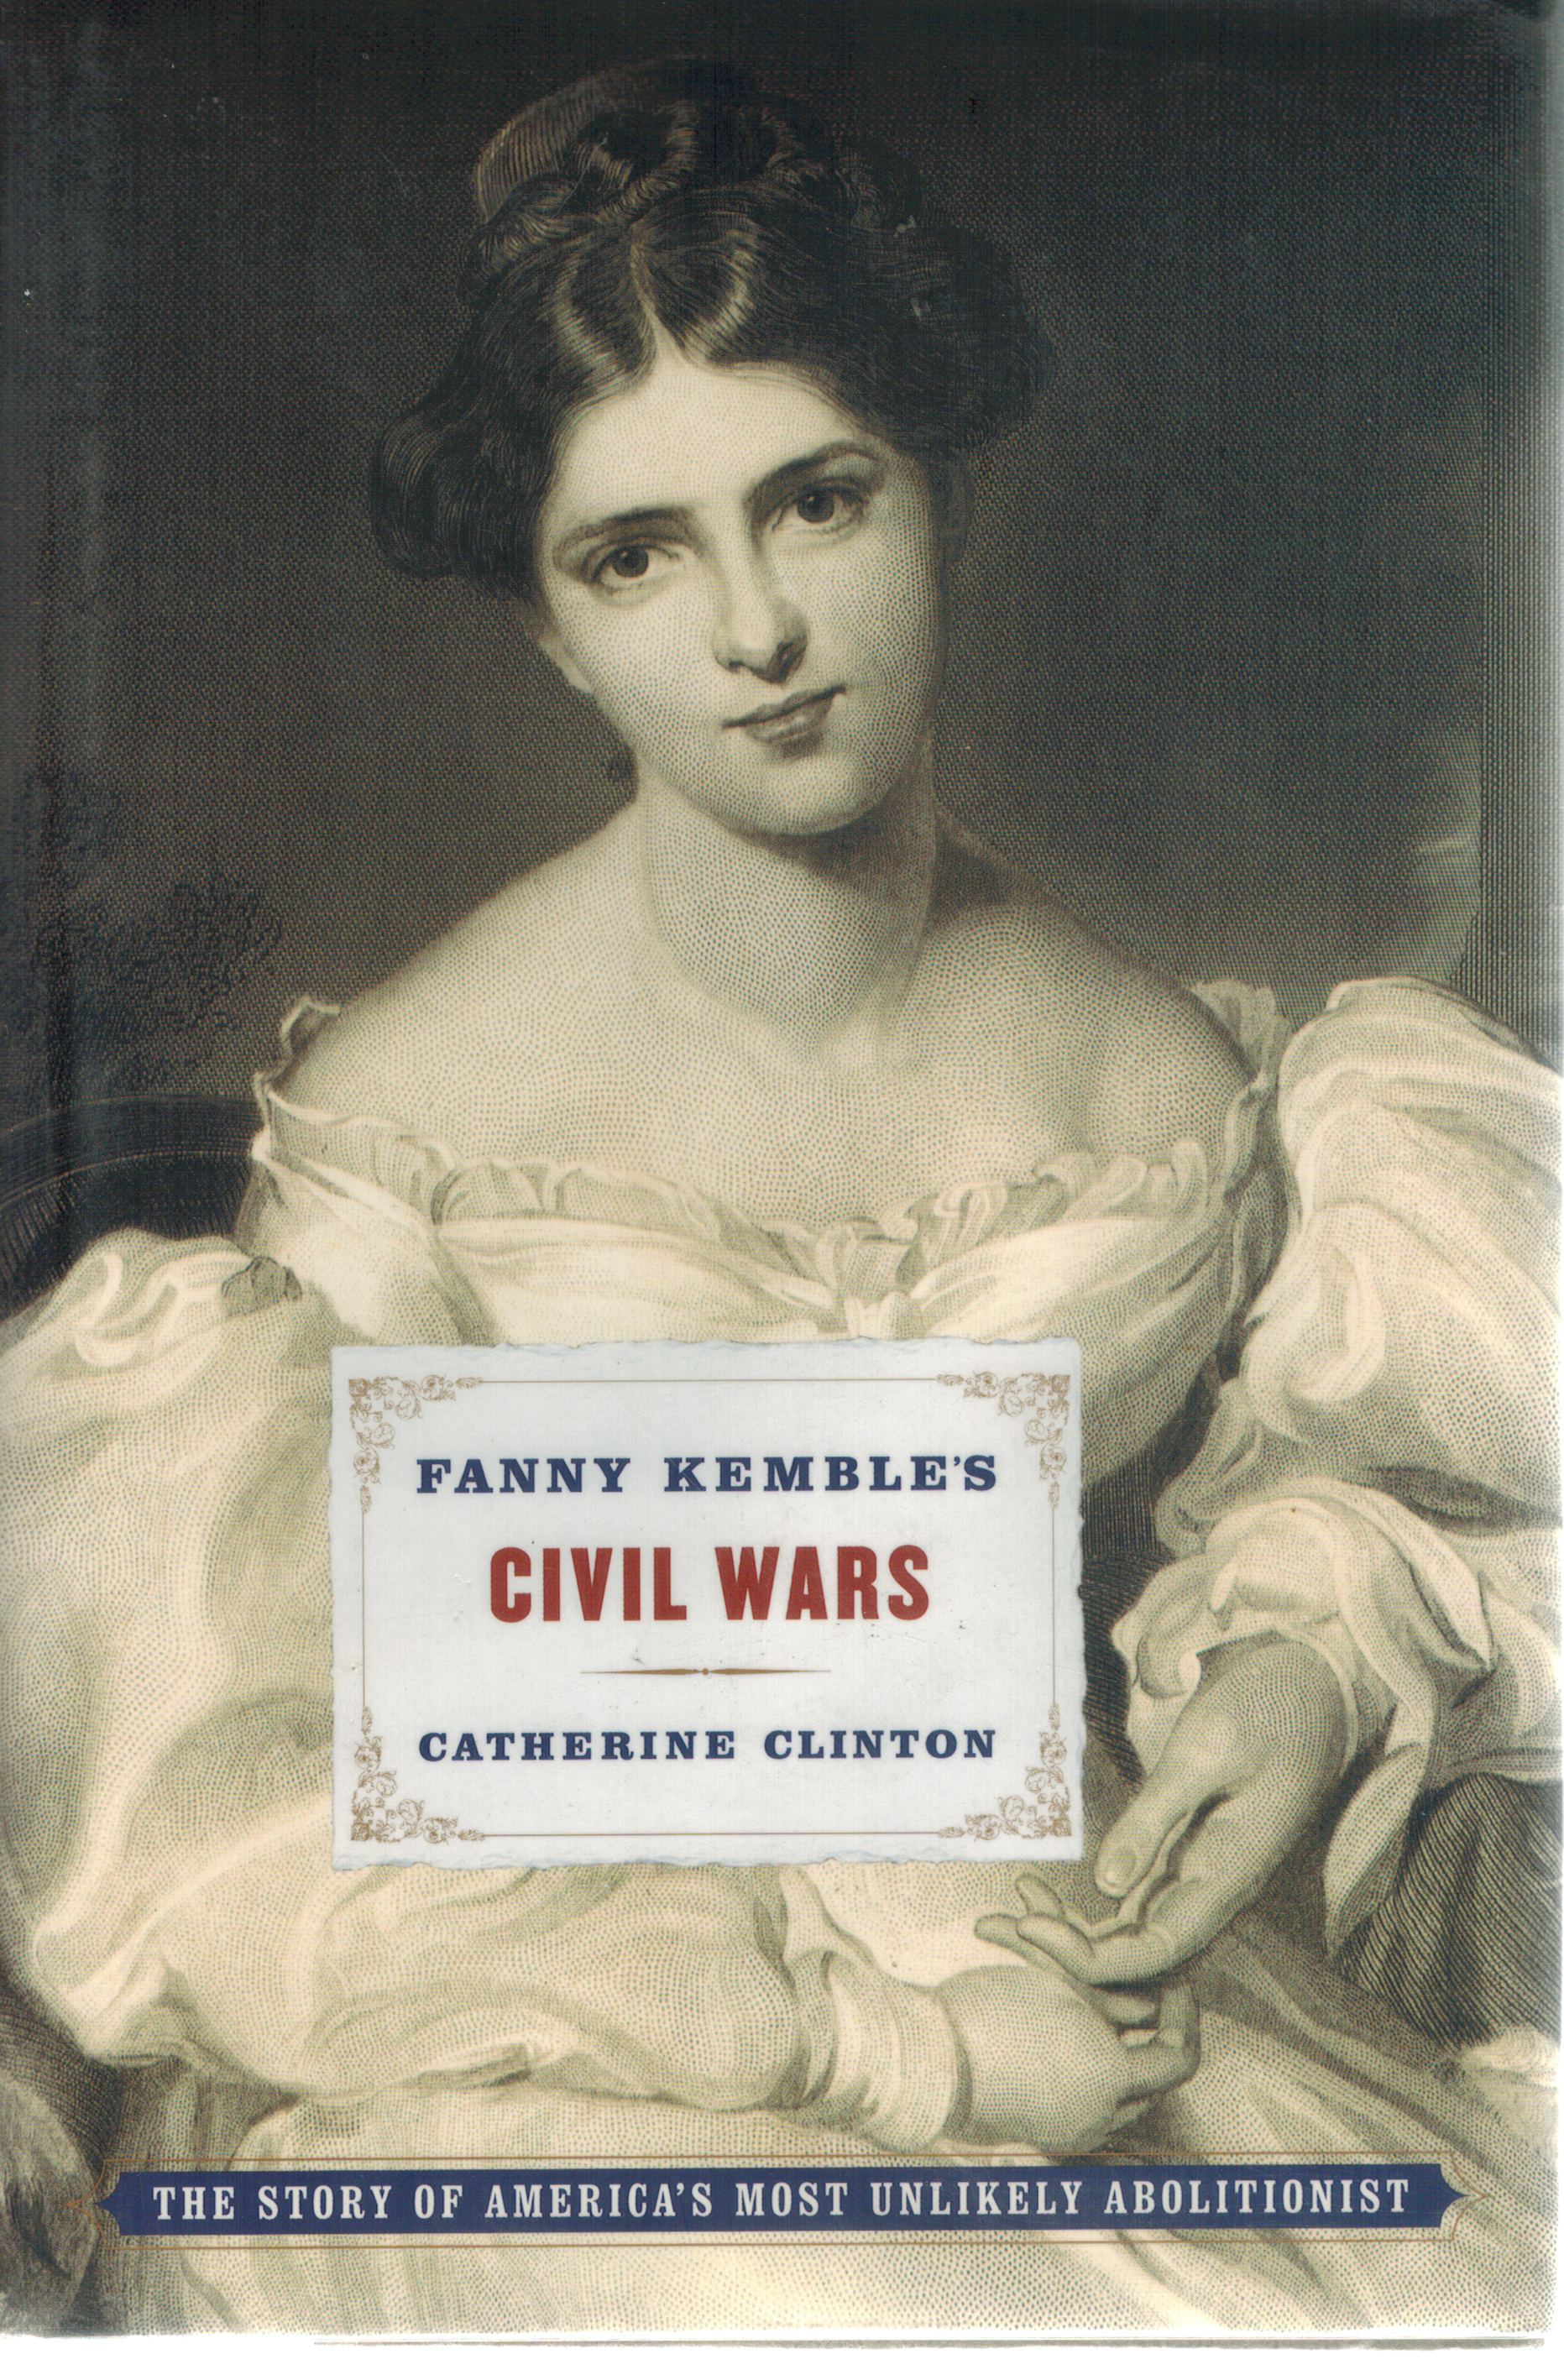 Fanny Kemble's Civil Wars: The Story of America's Most Unlikely Abolitionist